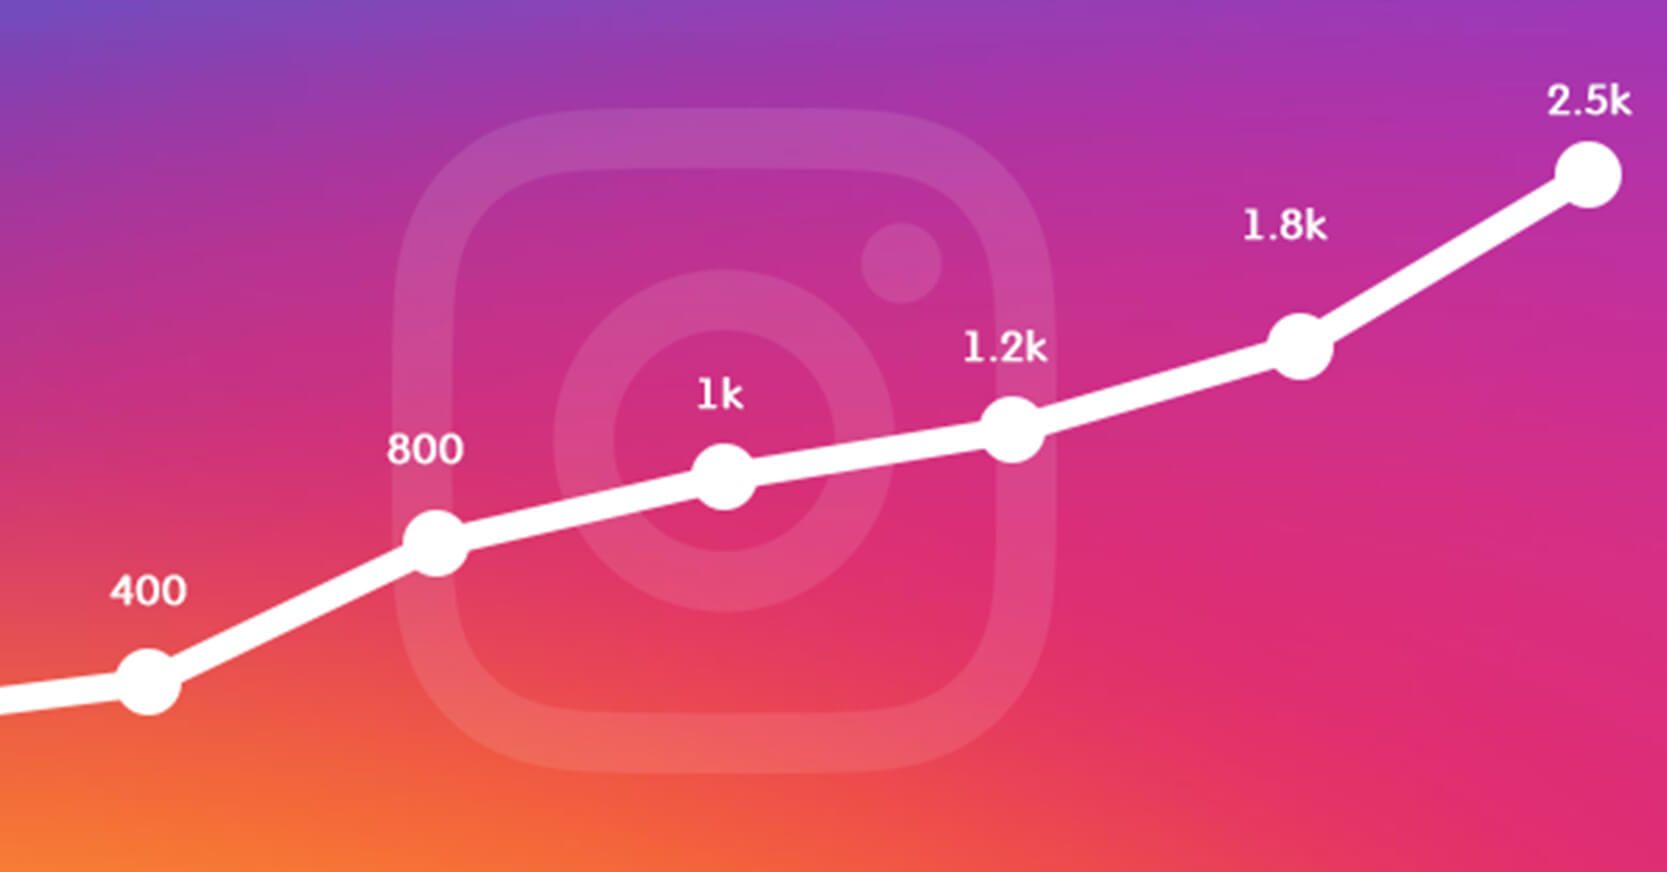 How to improve your Instagram growth strategy?